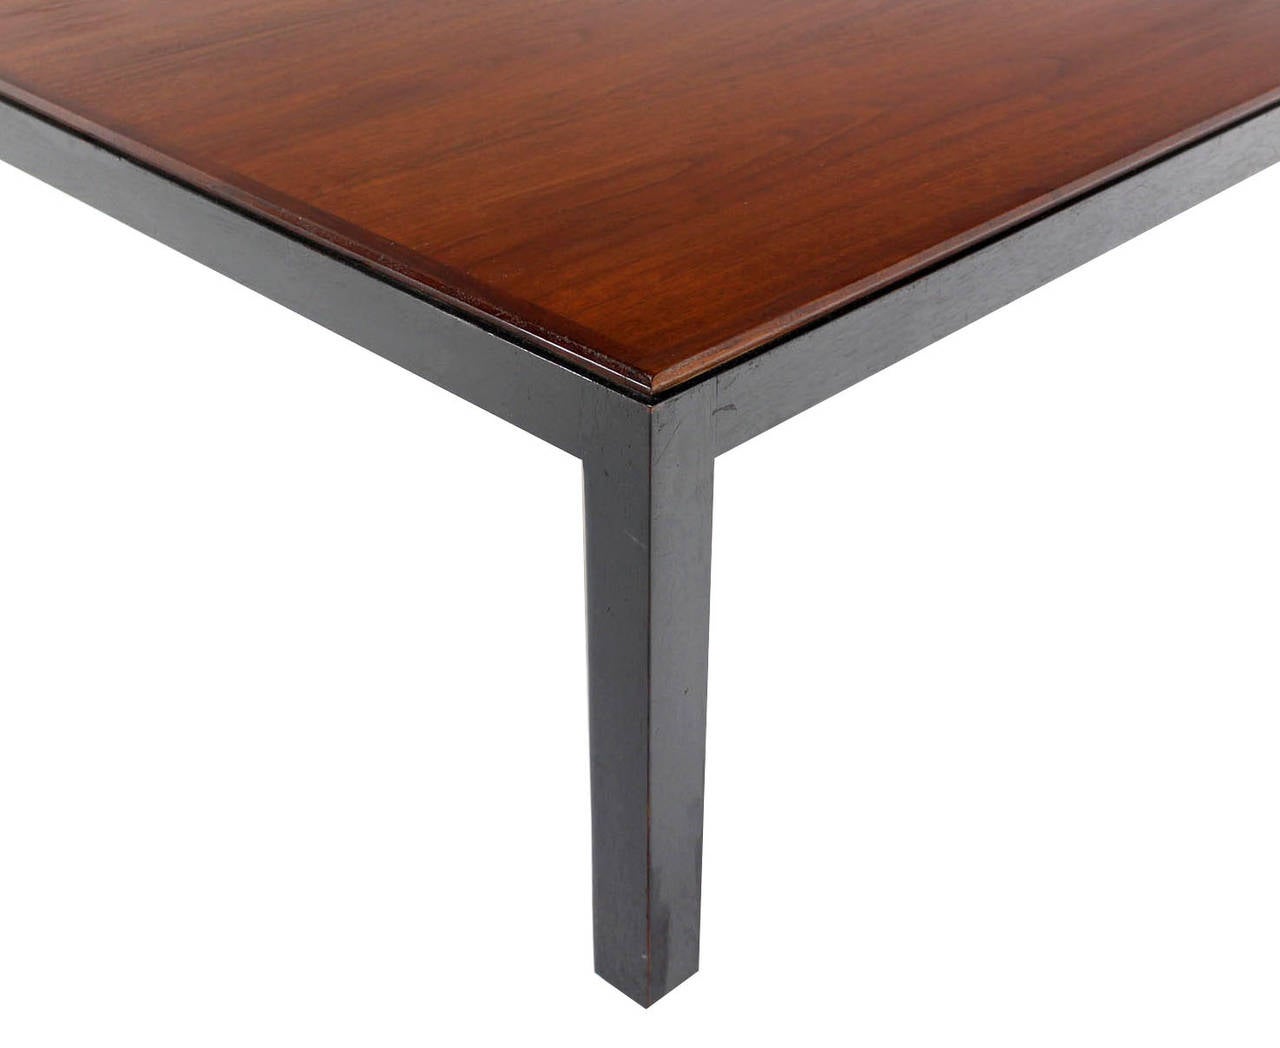 American Ebonised Frame Walnut Top Square Coffee Occasional Table